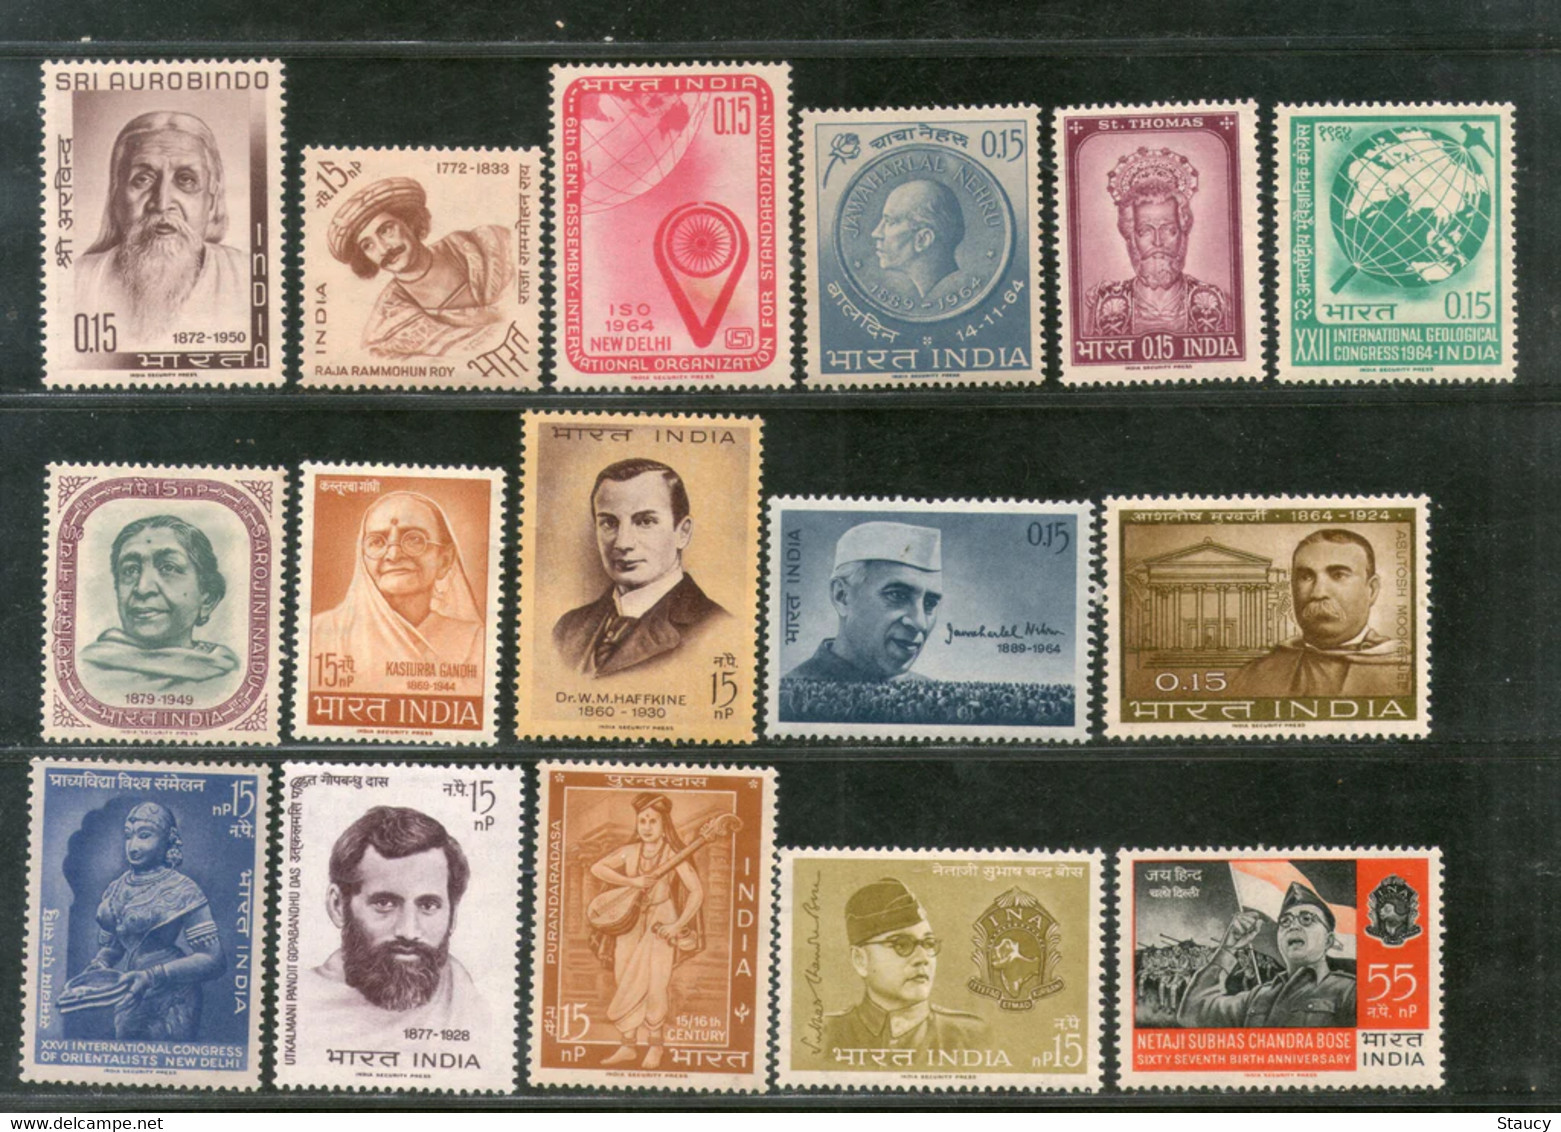 India 1964 Complete Year Pack / Set / Collection Total 16 Stamps (No Missing) MNH As Per Scan - Unused Stamps